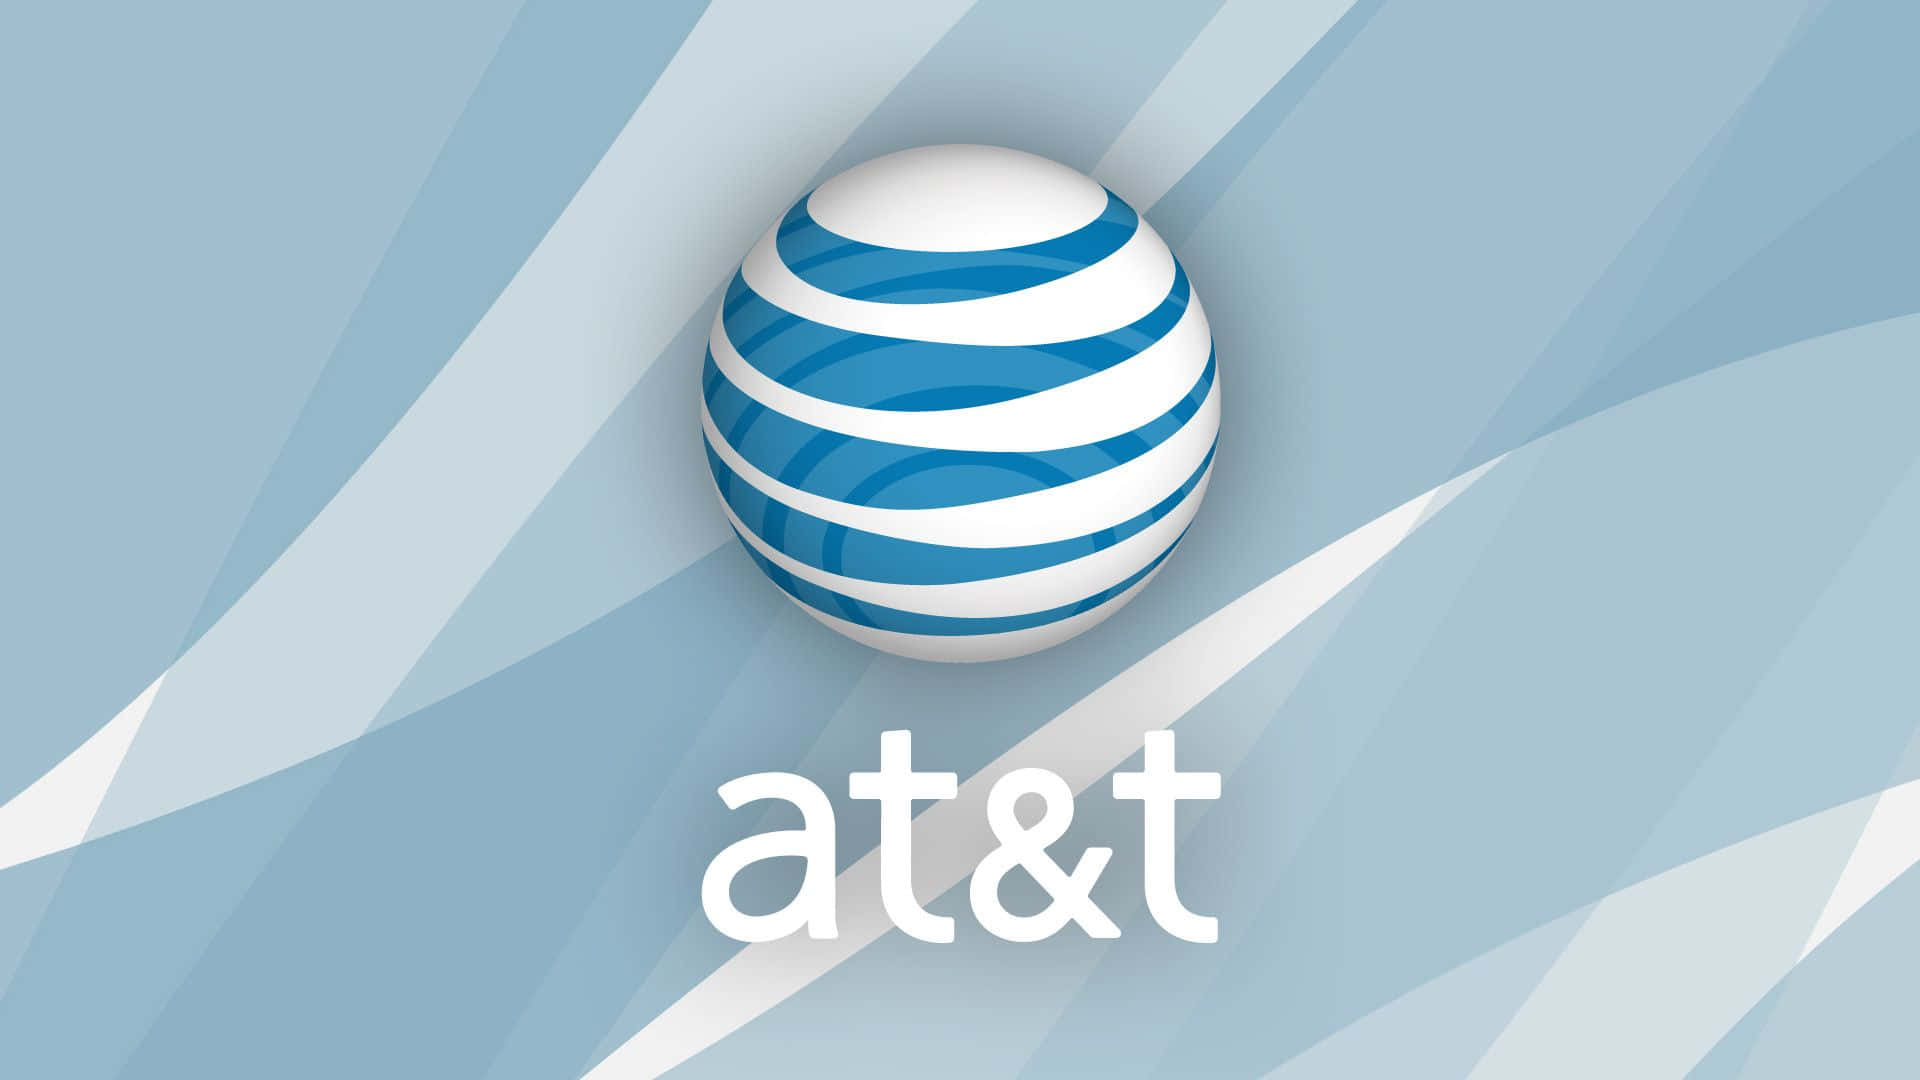 At&t Logo On A Blue Background Wallpaper